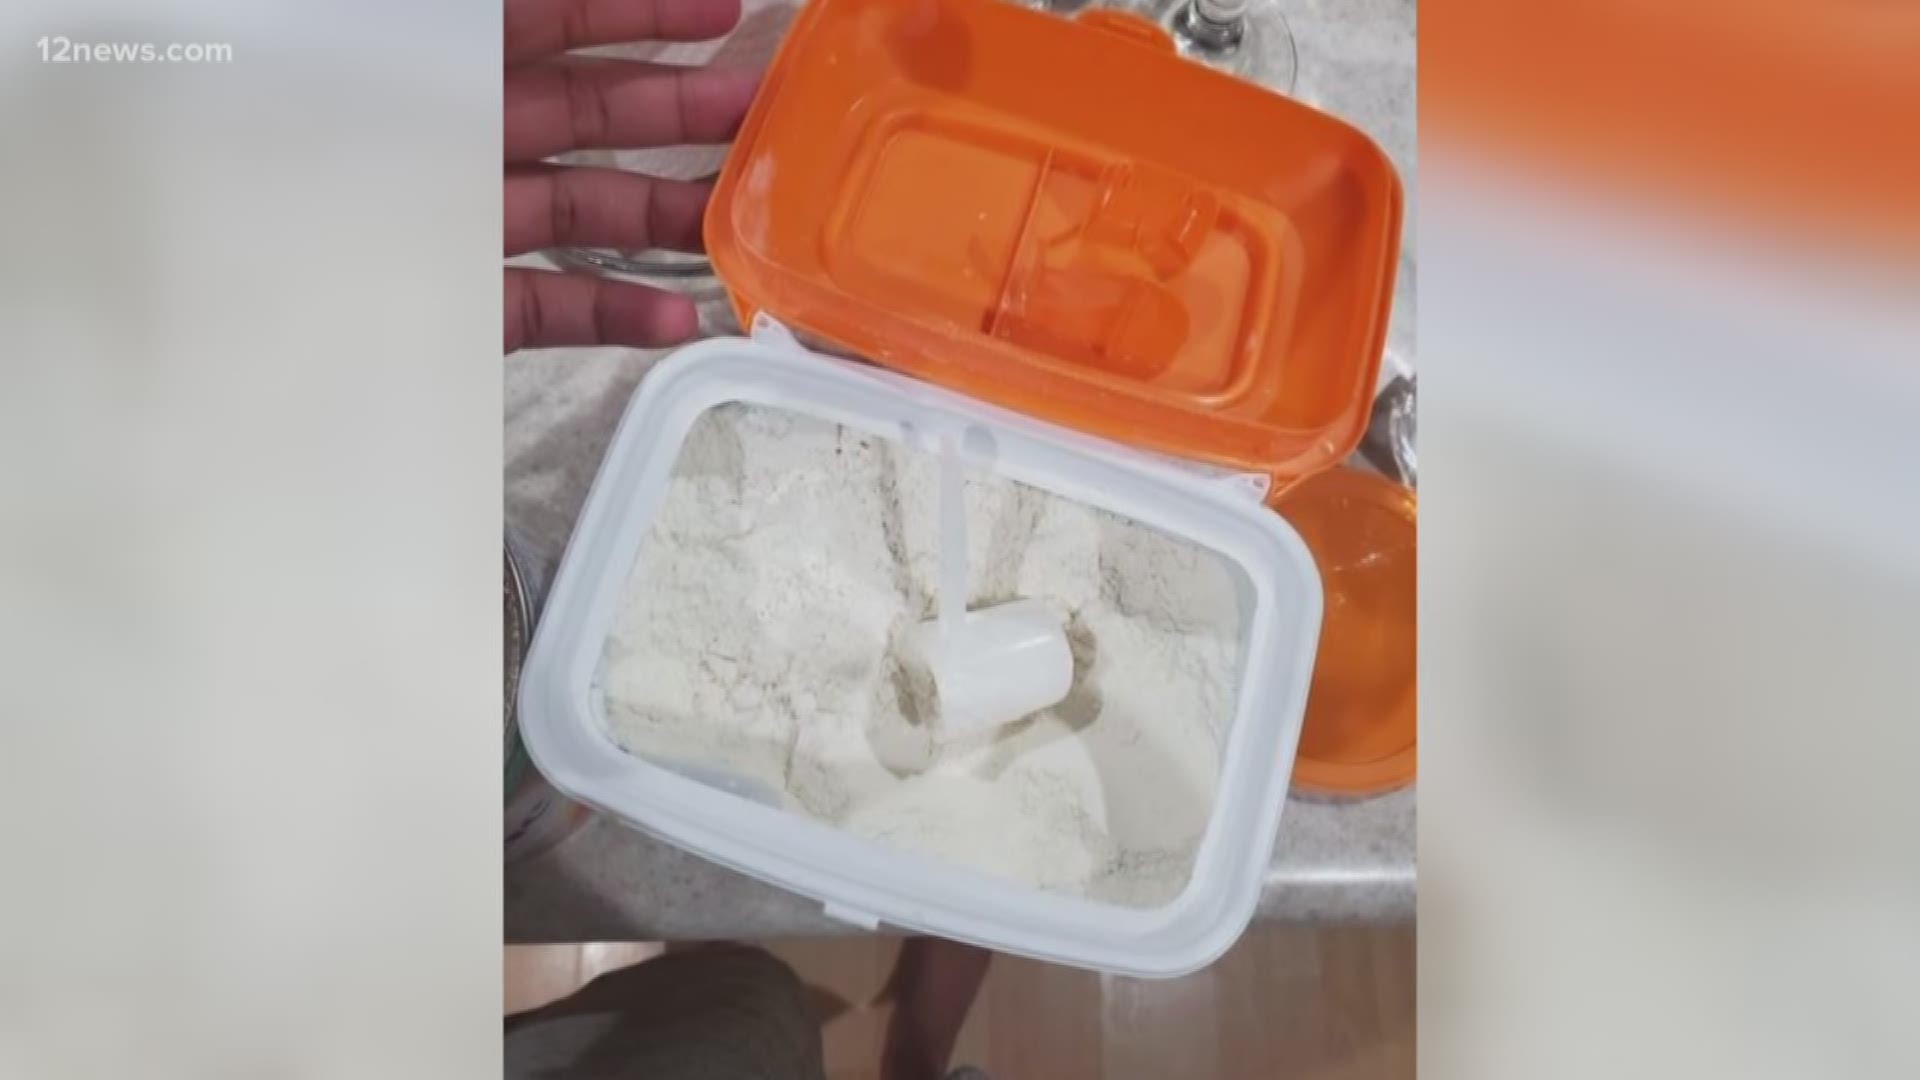 A Phoenix mom is warning others to check their baby's formula after her 9-month-old got sick with what she now believes was flour, not formula.